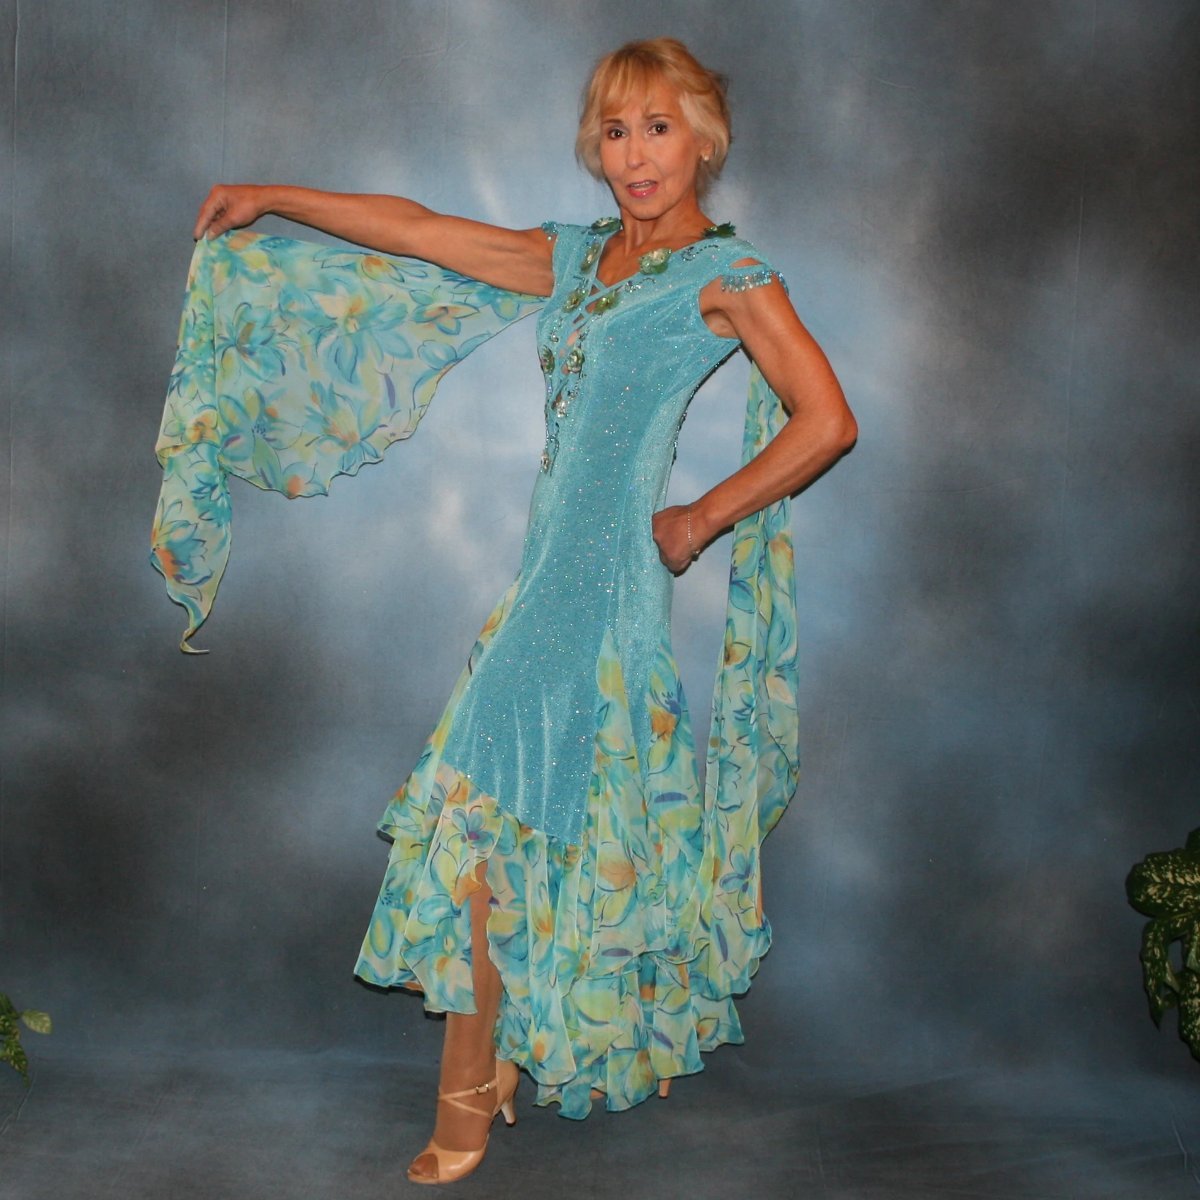 Crystal's Creations side view of Turquoise ballroom dress of turquoise glitter slinky features lattice work detailing with yards & yards of print chiffon, enhanced with velveteen flowers plus aquamarine Swarovski rhinestones, hand beading on shoulder detailing... with detachable floats.